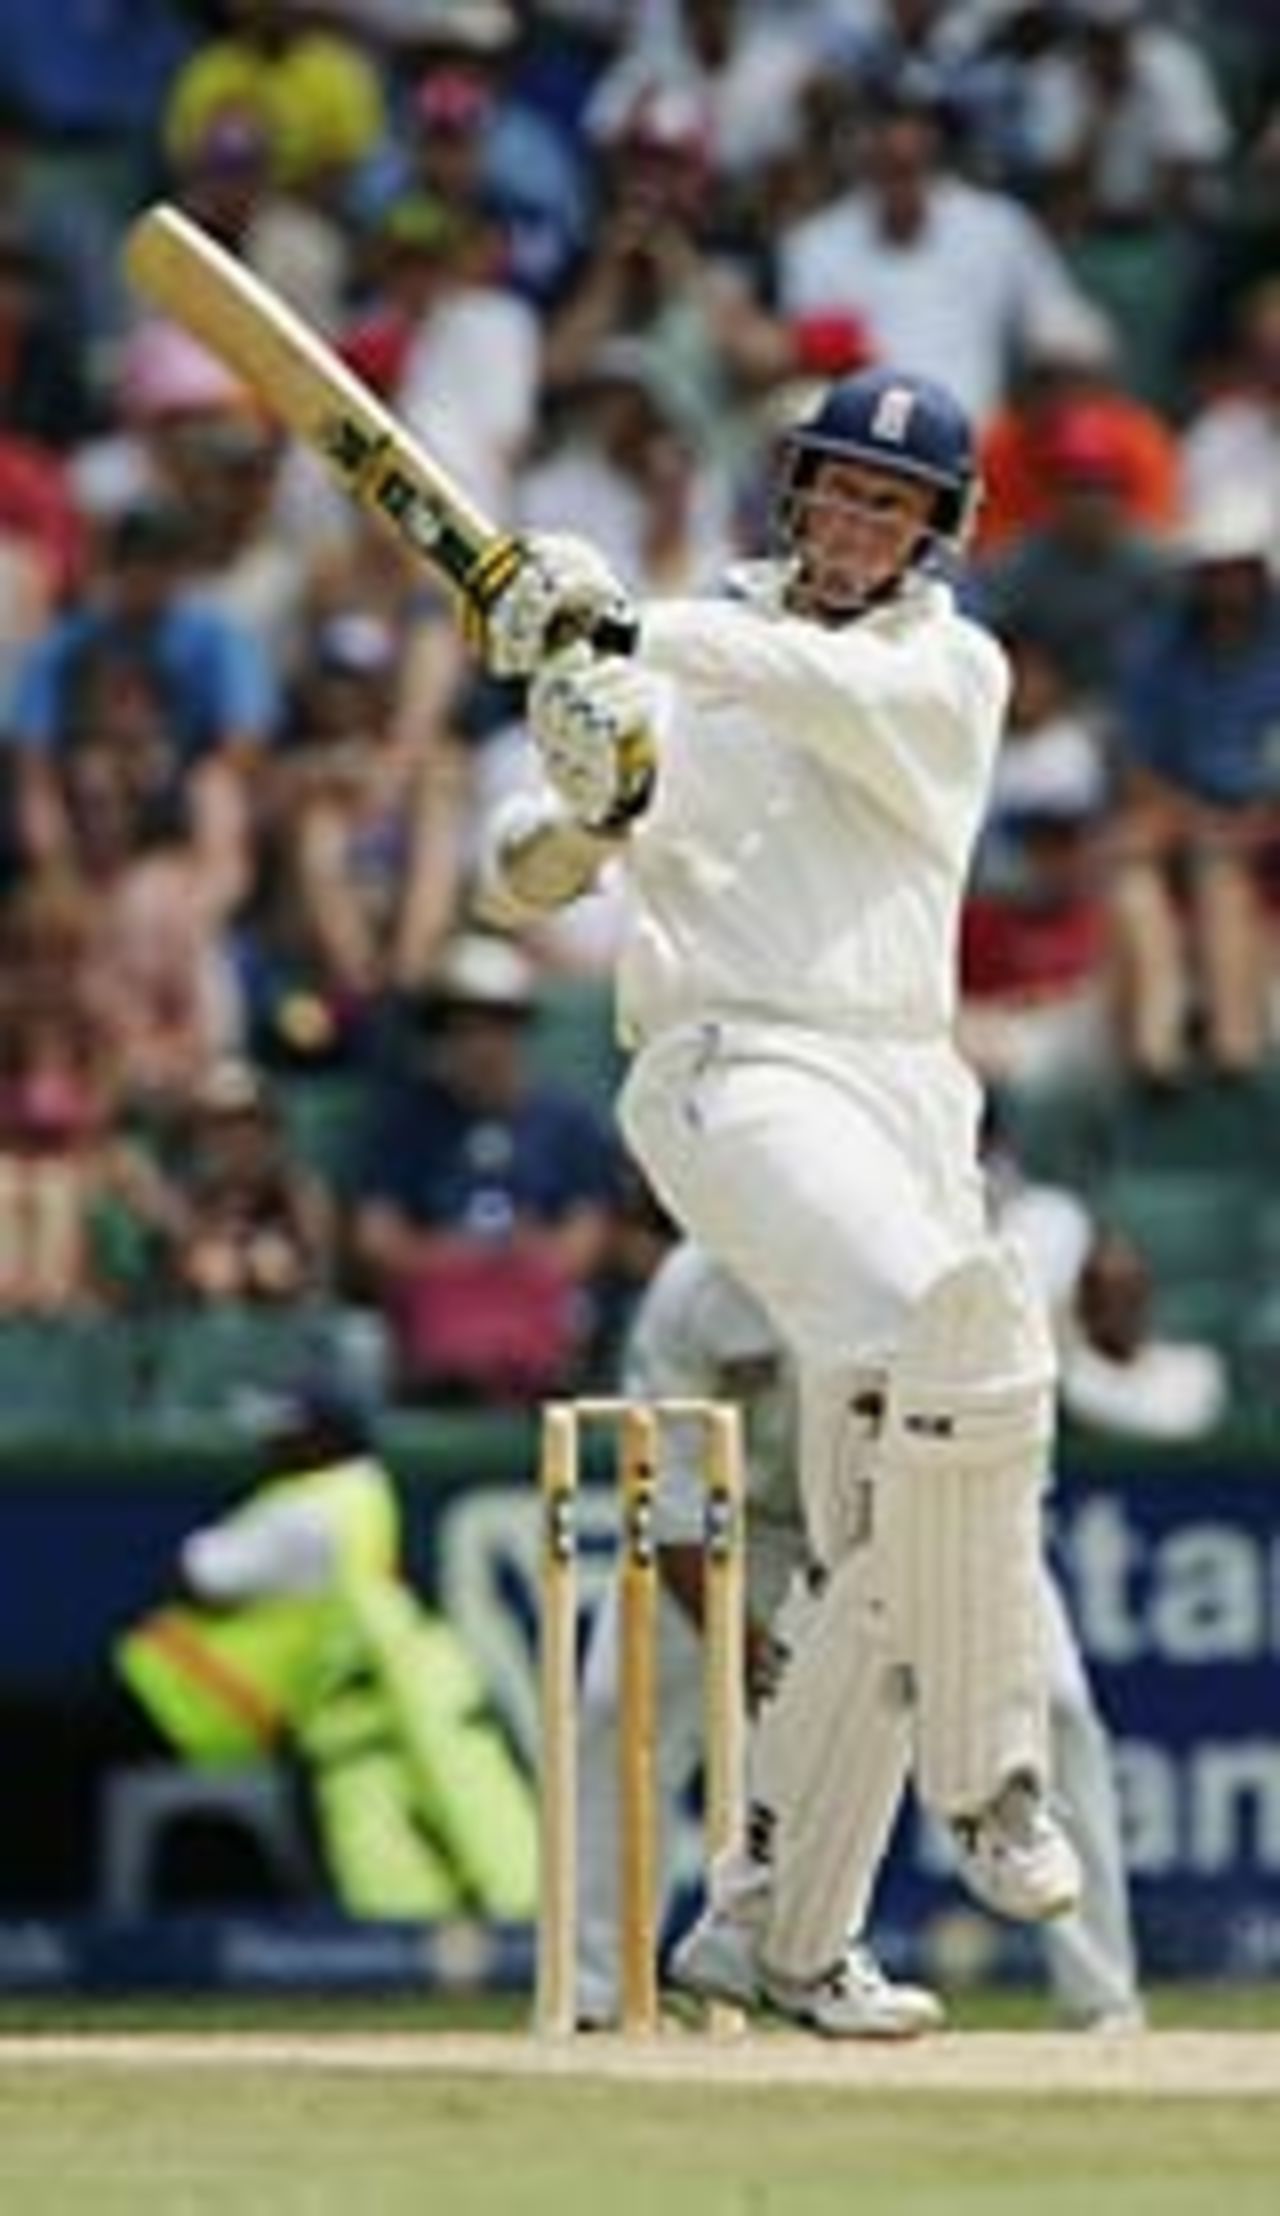 Marcus Trescothick hits out as England battle back on the fourth day, South Africa v England, 4th Test, Johannesburg, January 16, 2005